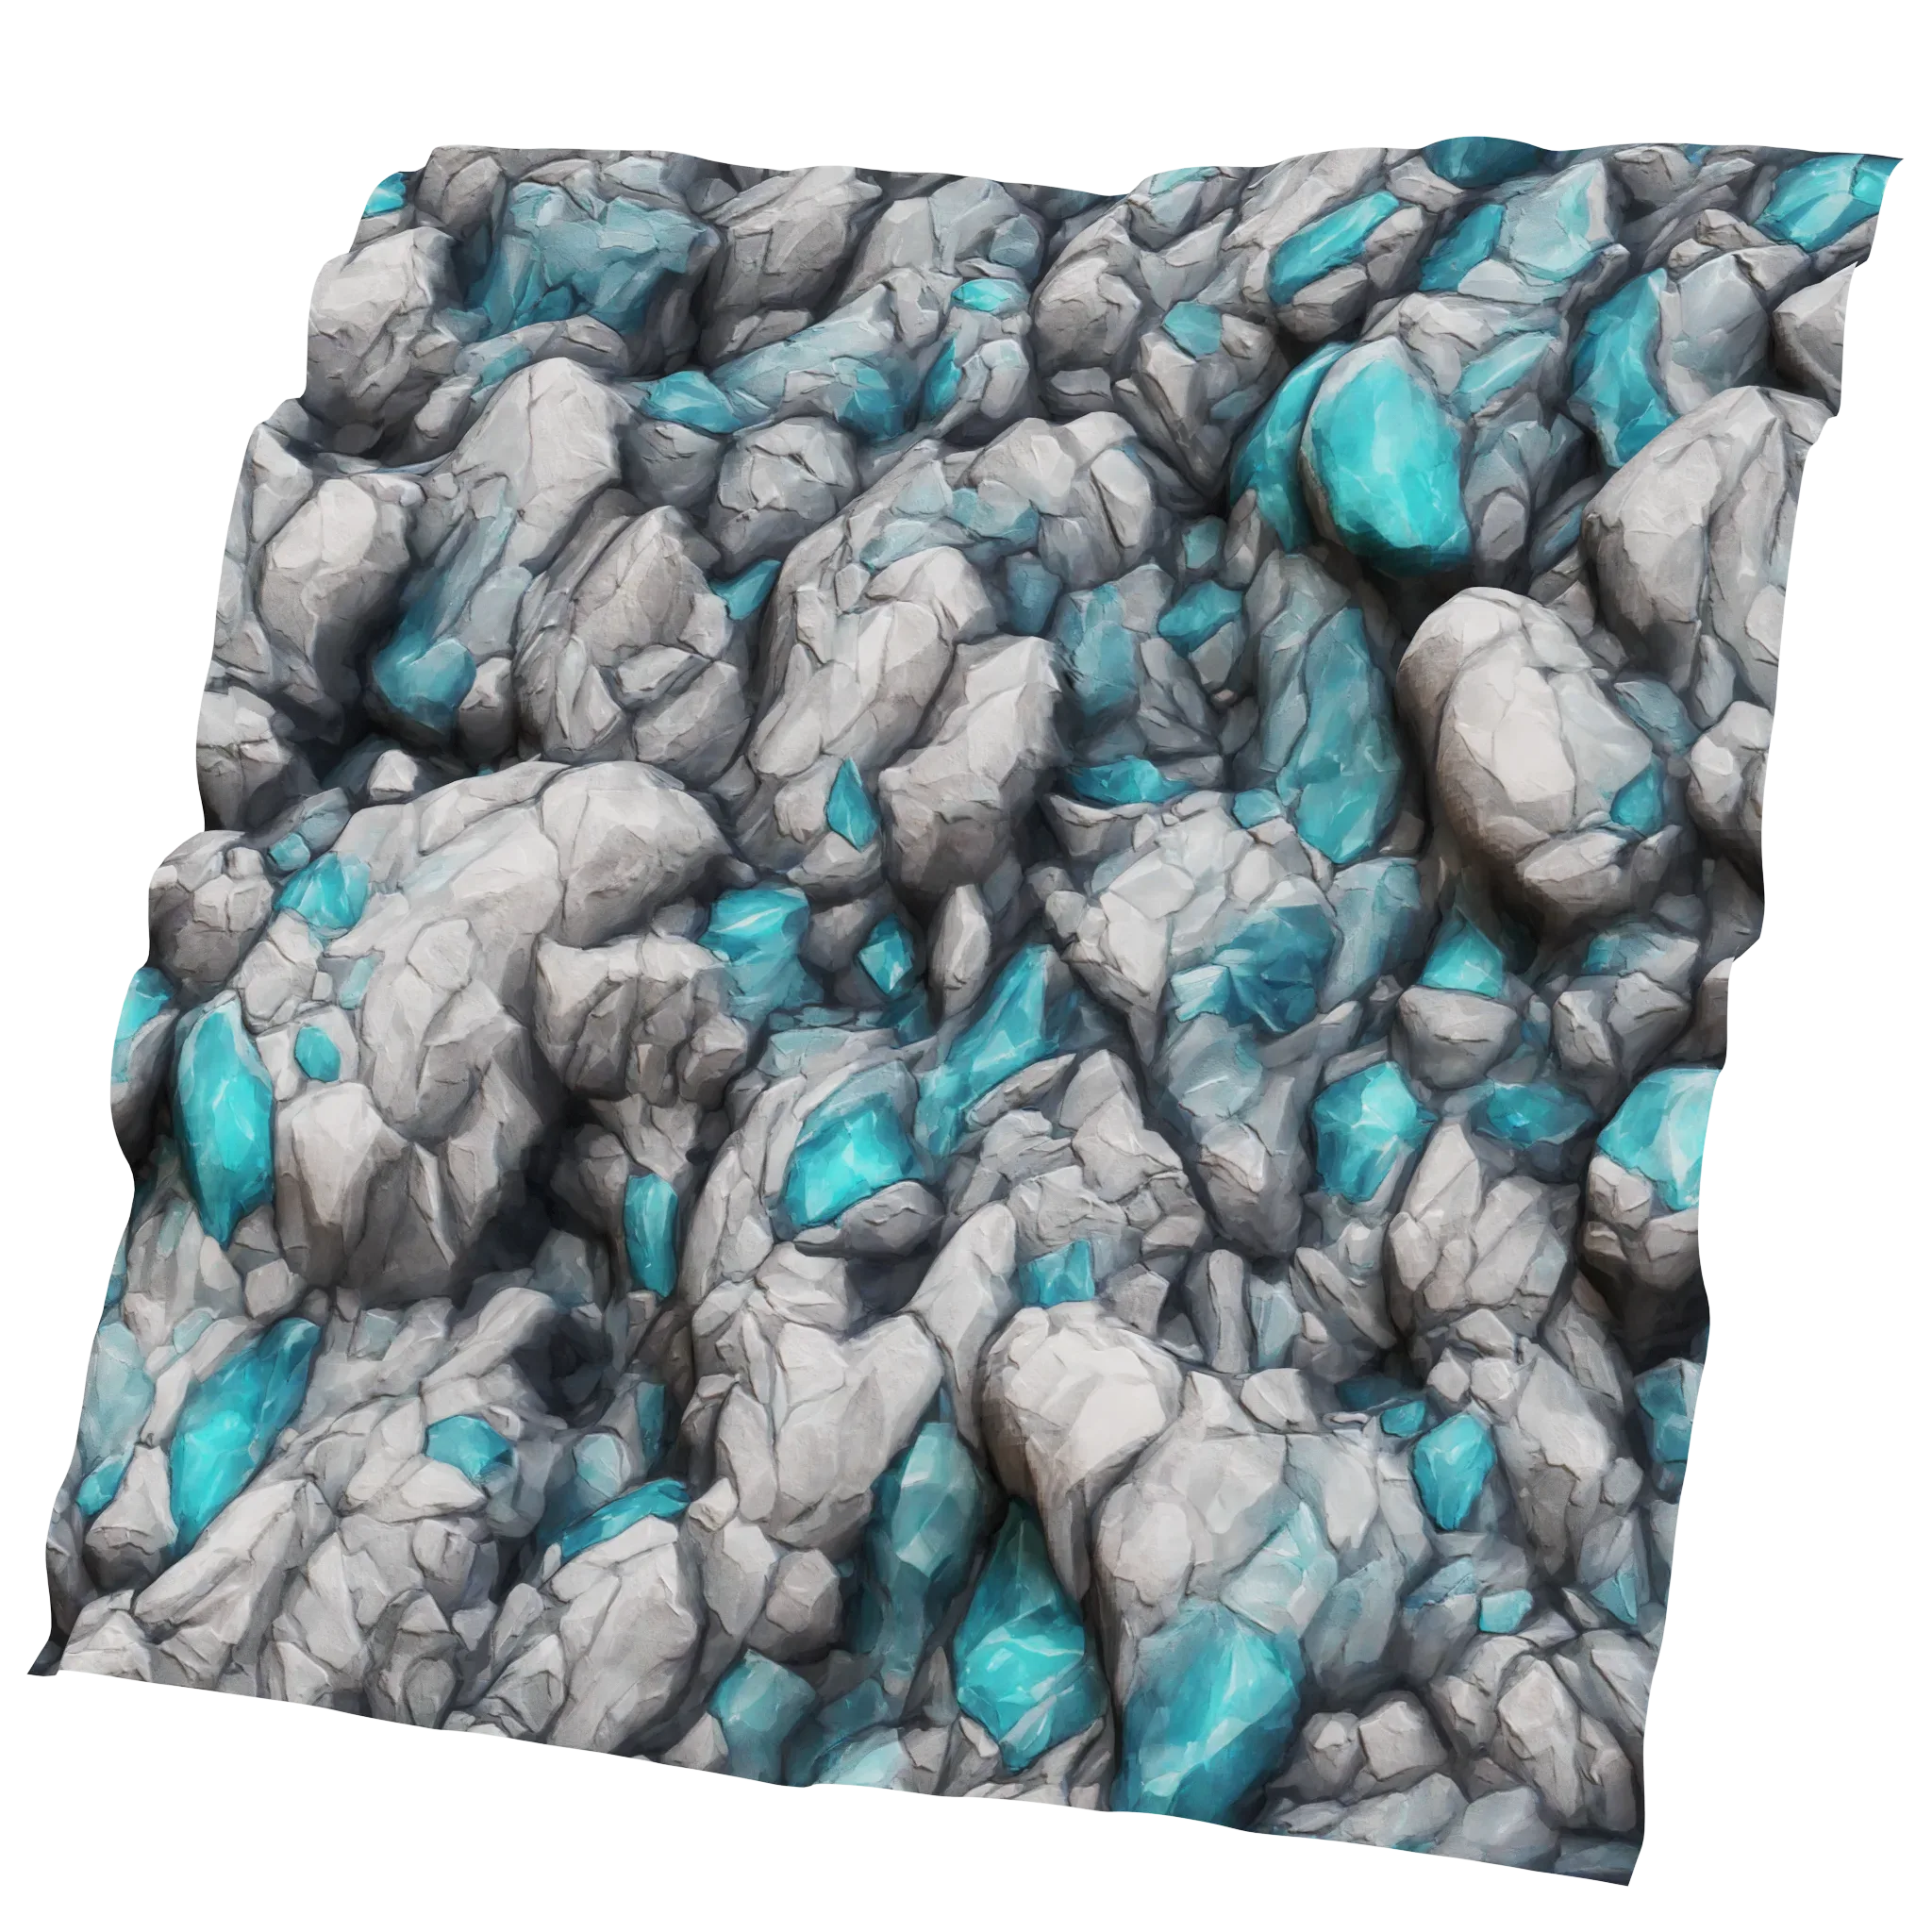 Stylized Minerals v2 Seamless Texture